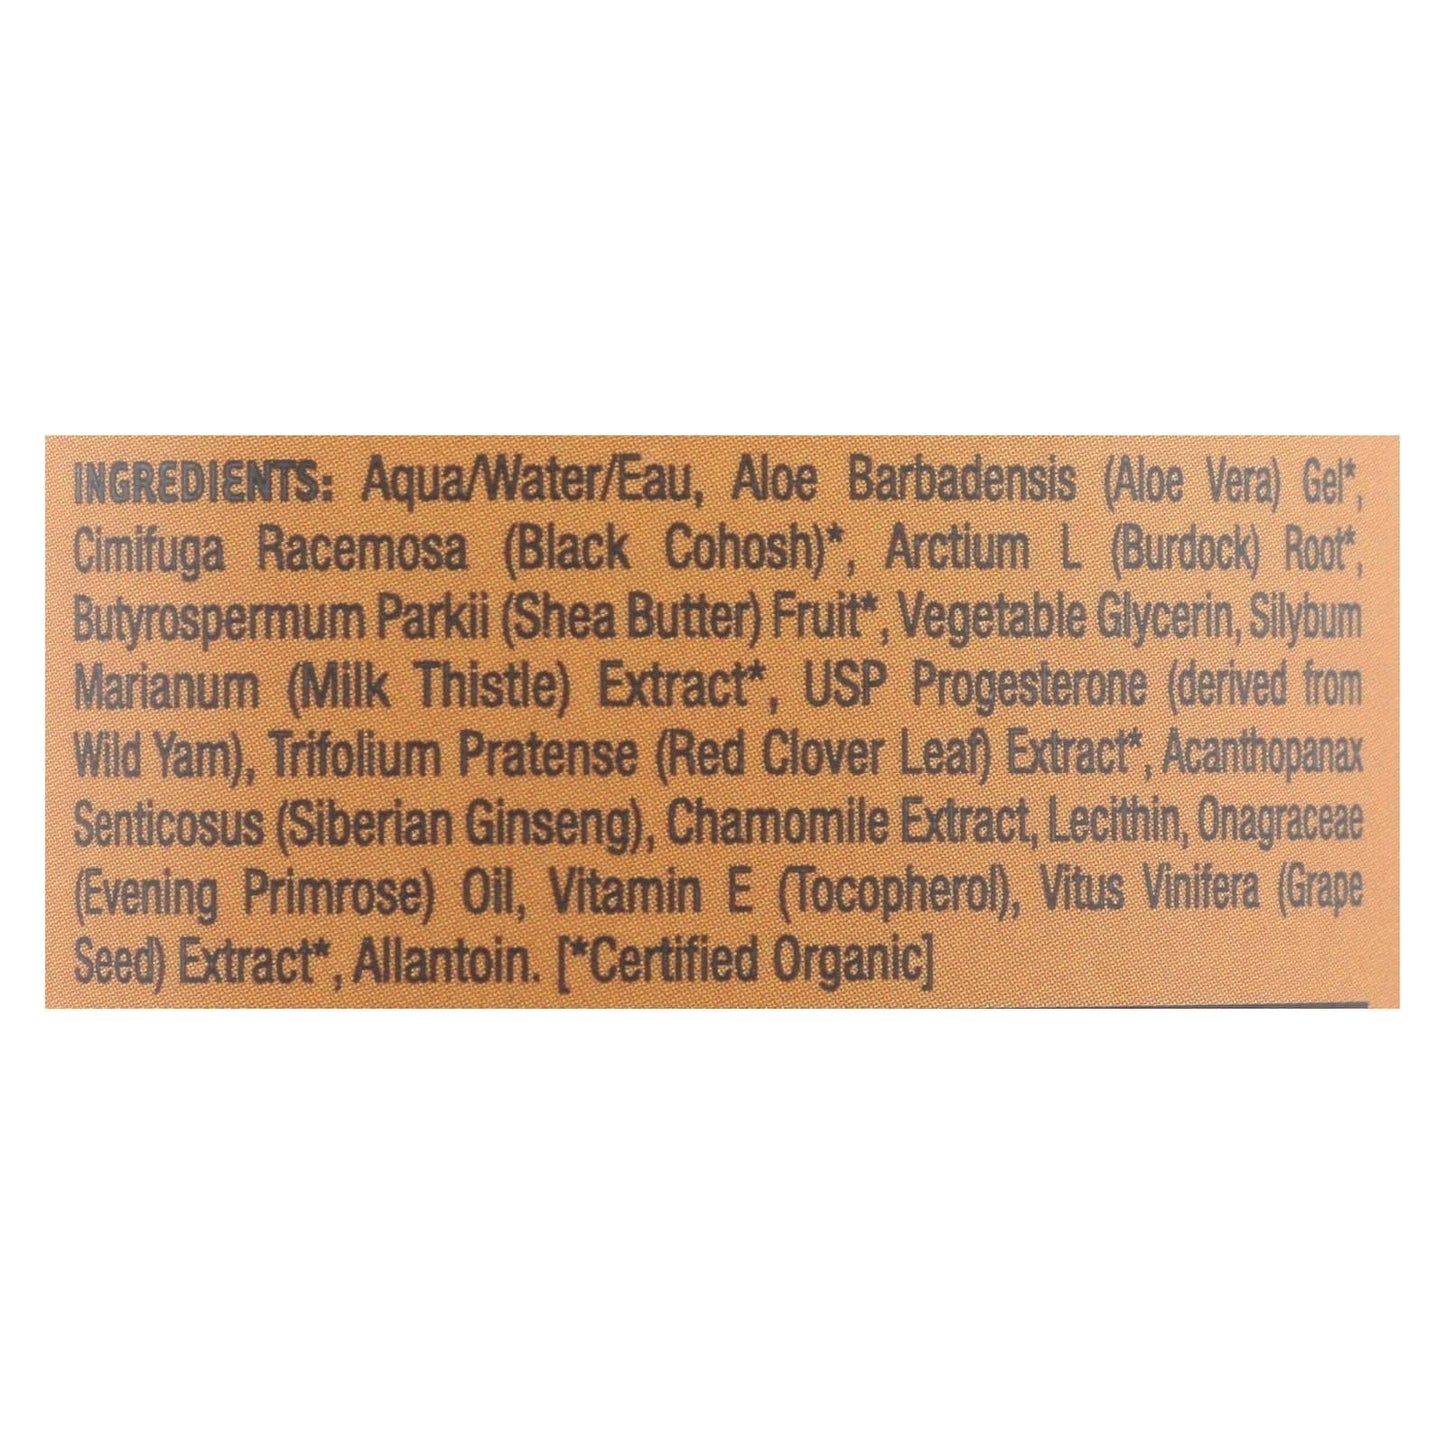 Buy Organic Excellence Balance Plus Therapy Bio-identical Progesterone Cream With Phytoestrogens - 3 Oz  at OnlyNaturals.us